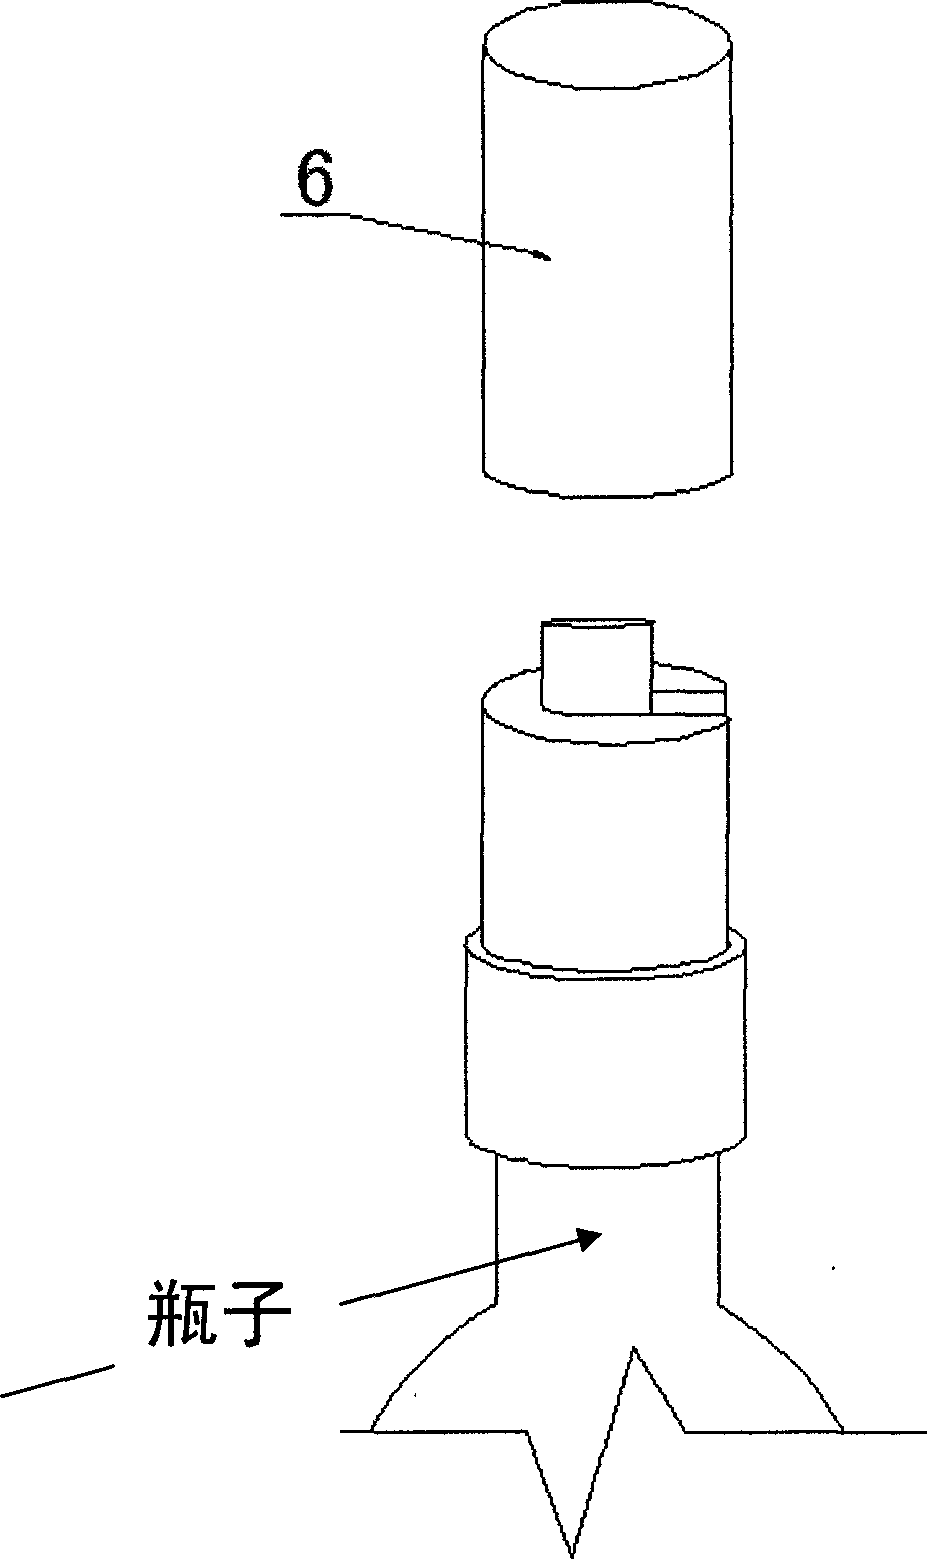 Triple seal mouth-pressing-type opening and closing bottle cap